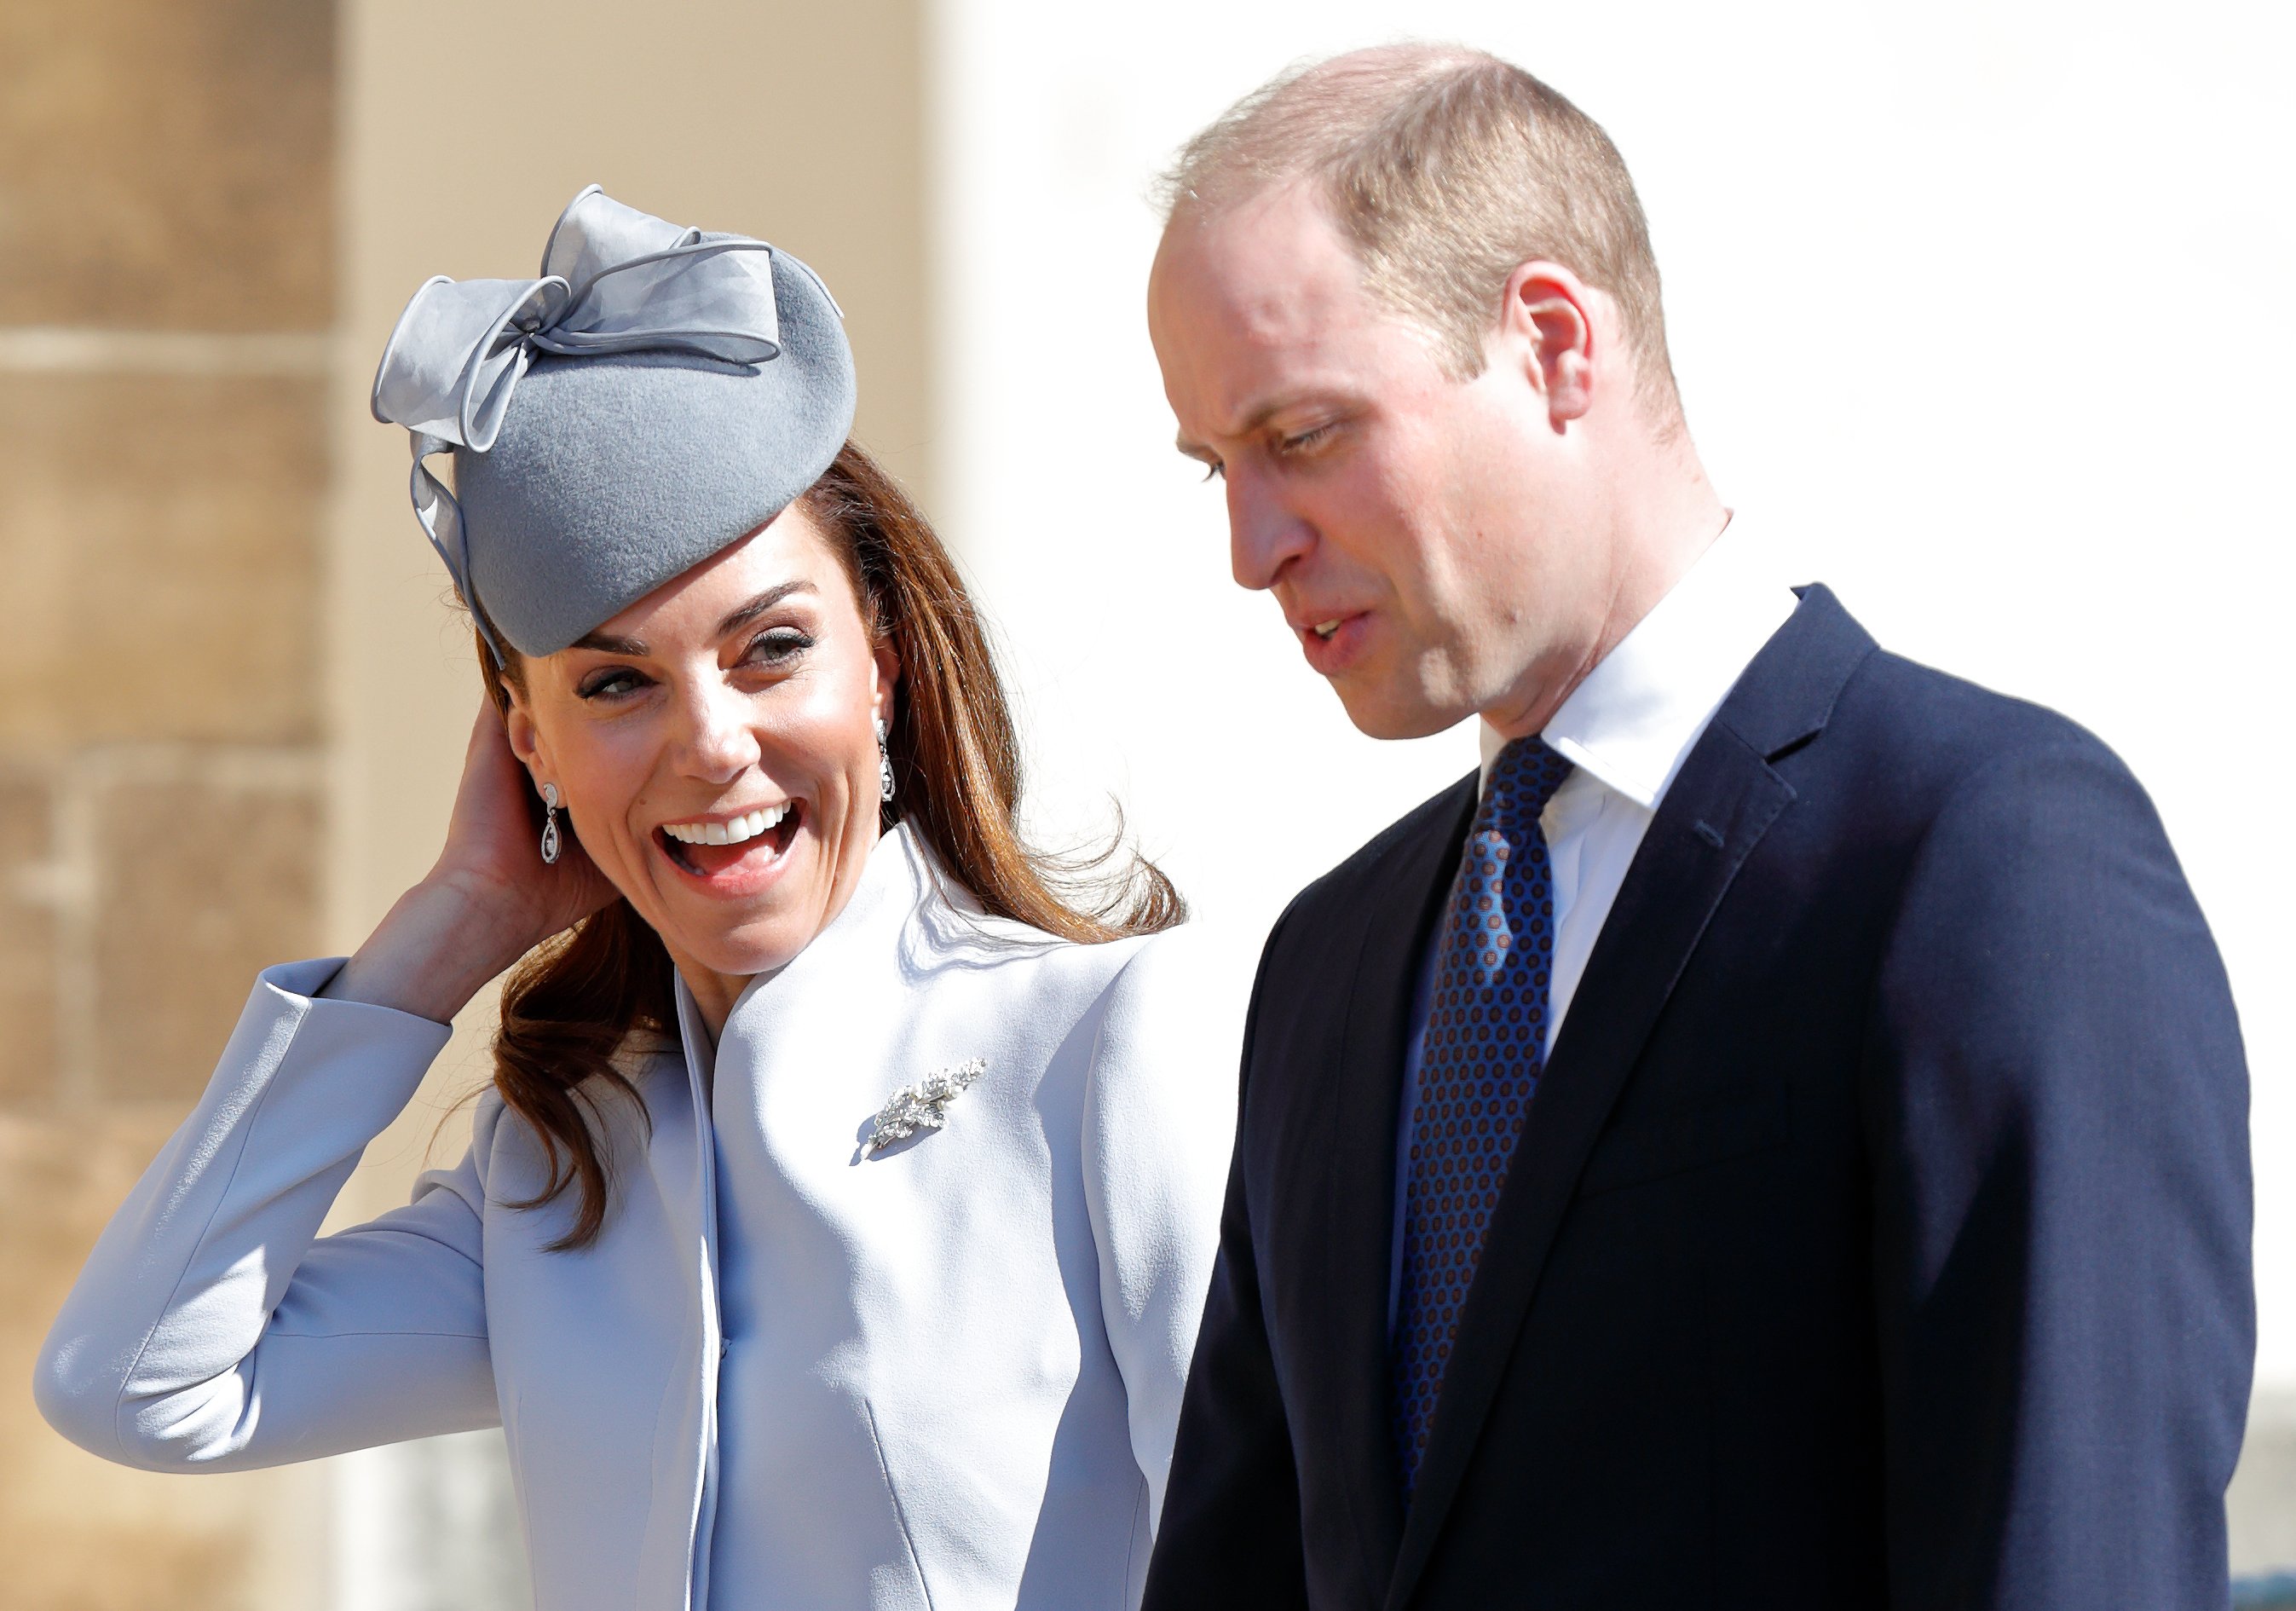 Kate Middleton and Prince William attend the Easter Sunday church service in Windsor, England on April 21, 2019 | Photo: Getty Images